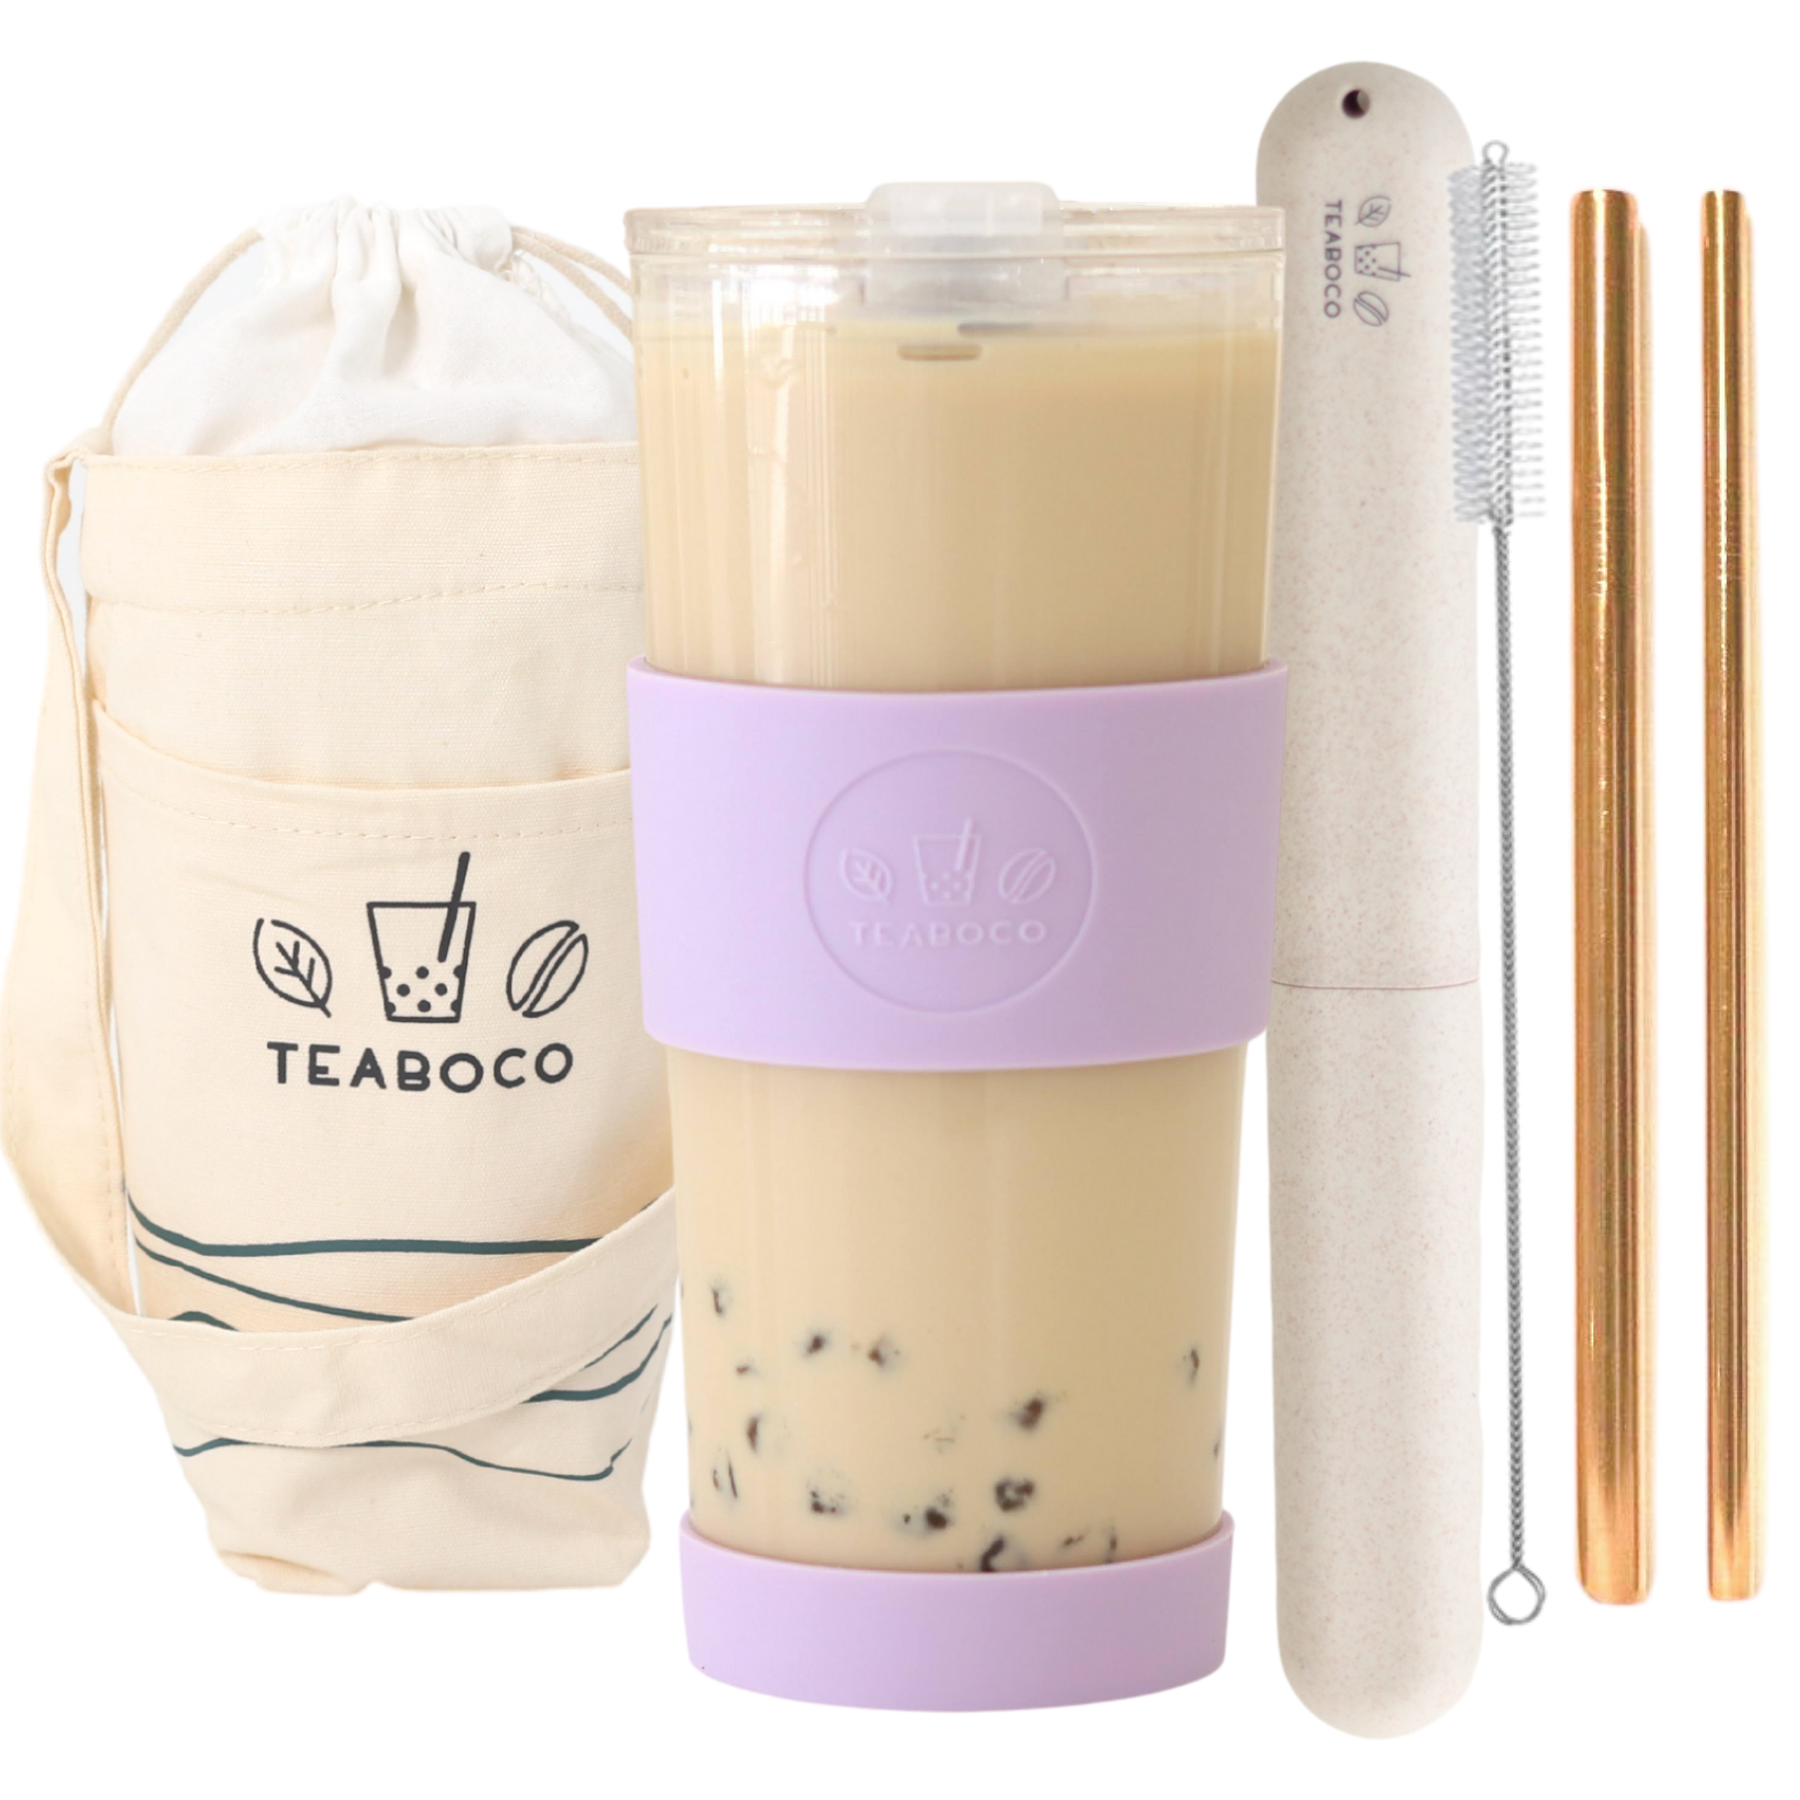 EleBoba Reusable Boba Cup with Lid and Straws - Leak Proof Tumbler for Bubble Tea and Smoothies - 24oz/700ml - Carry Pouch, Stickers, 2x Straws